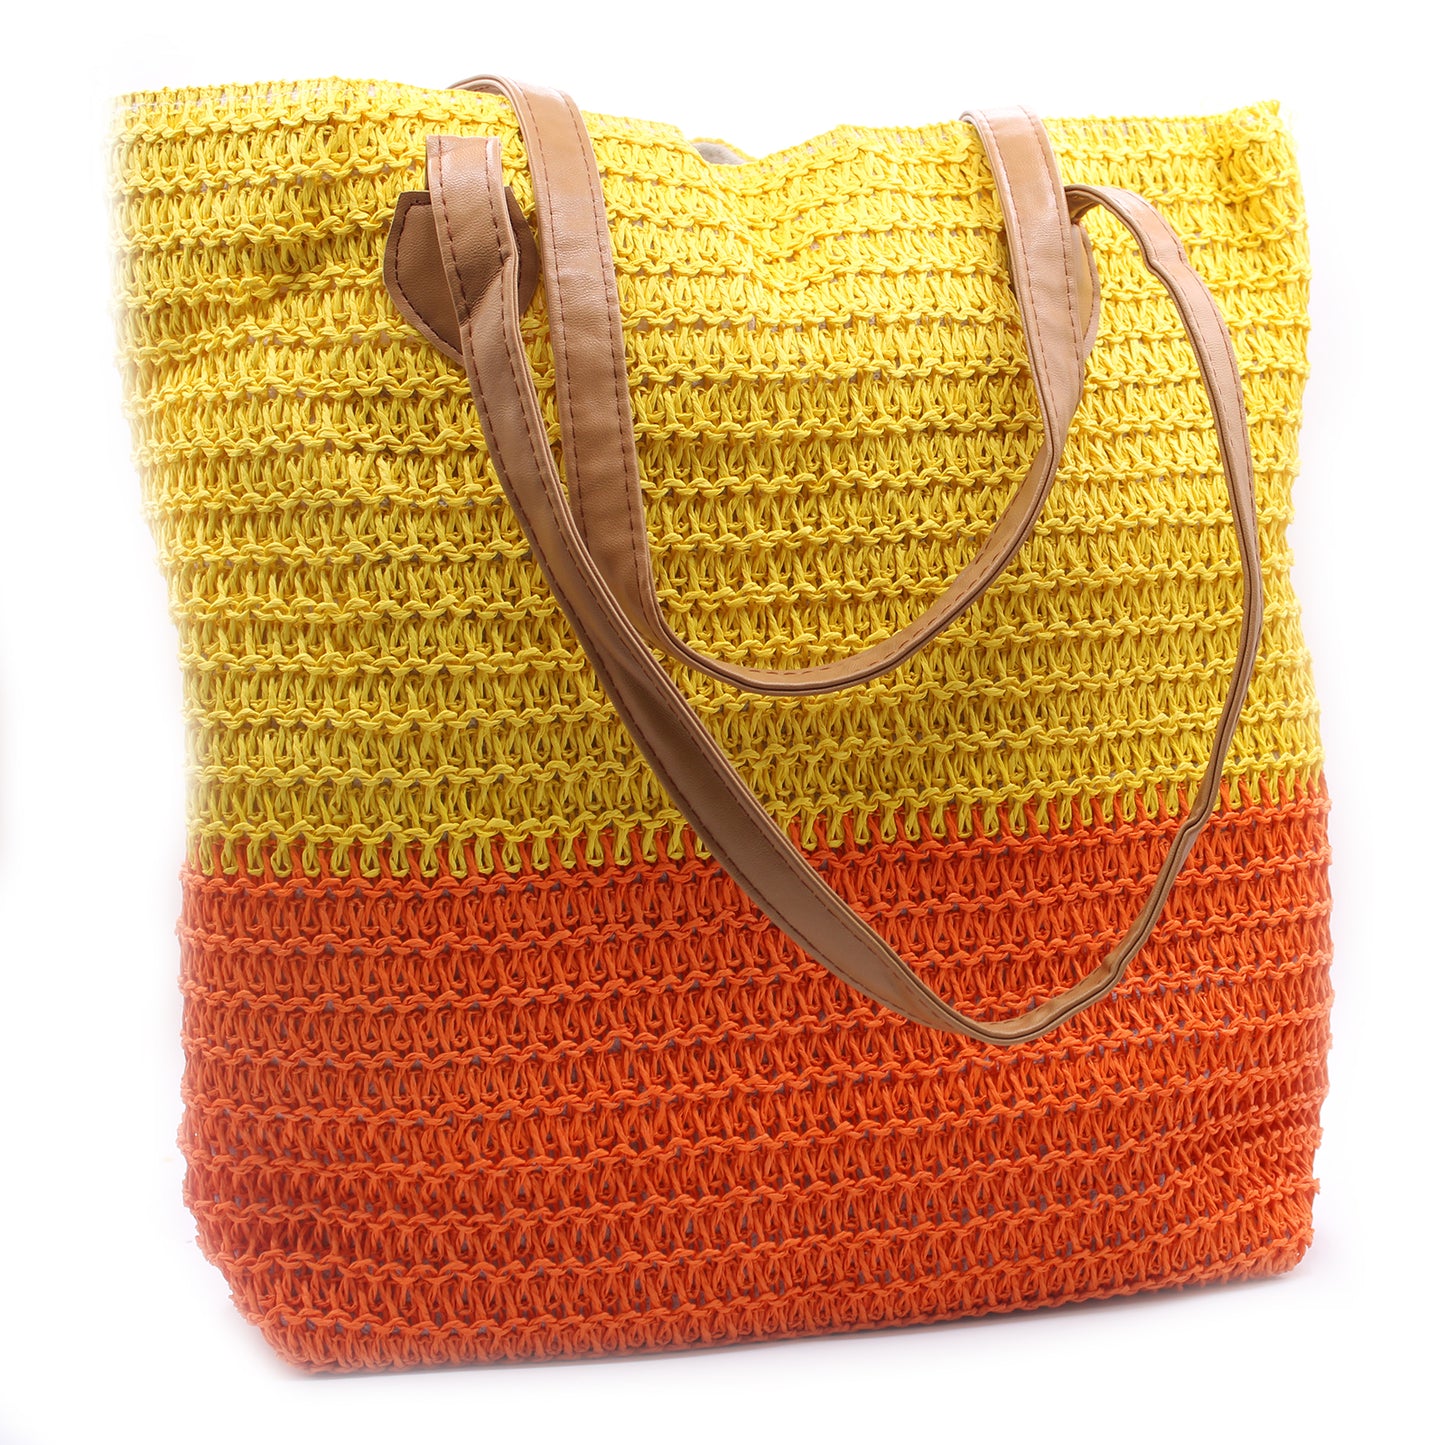 Back to the Bazaar Bag - Yellow and Orange